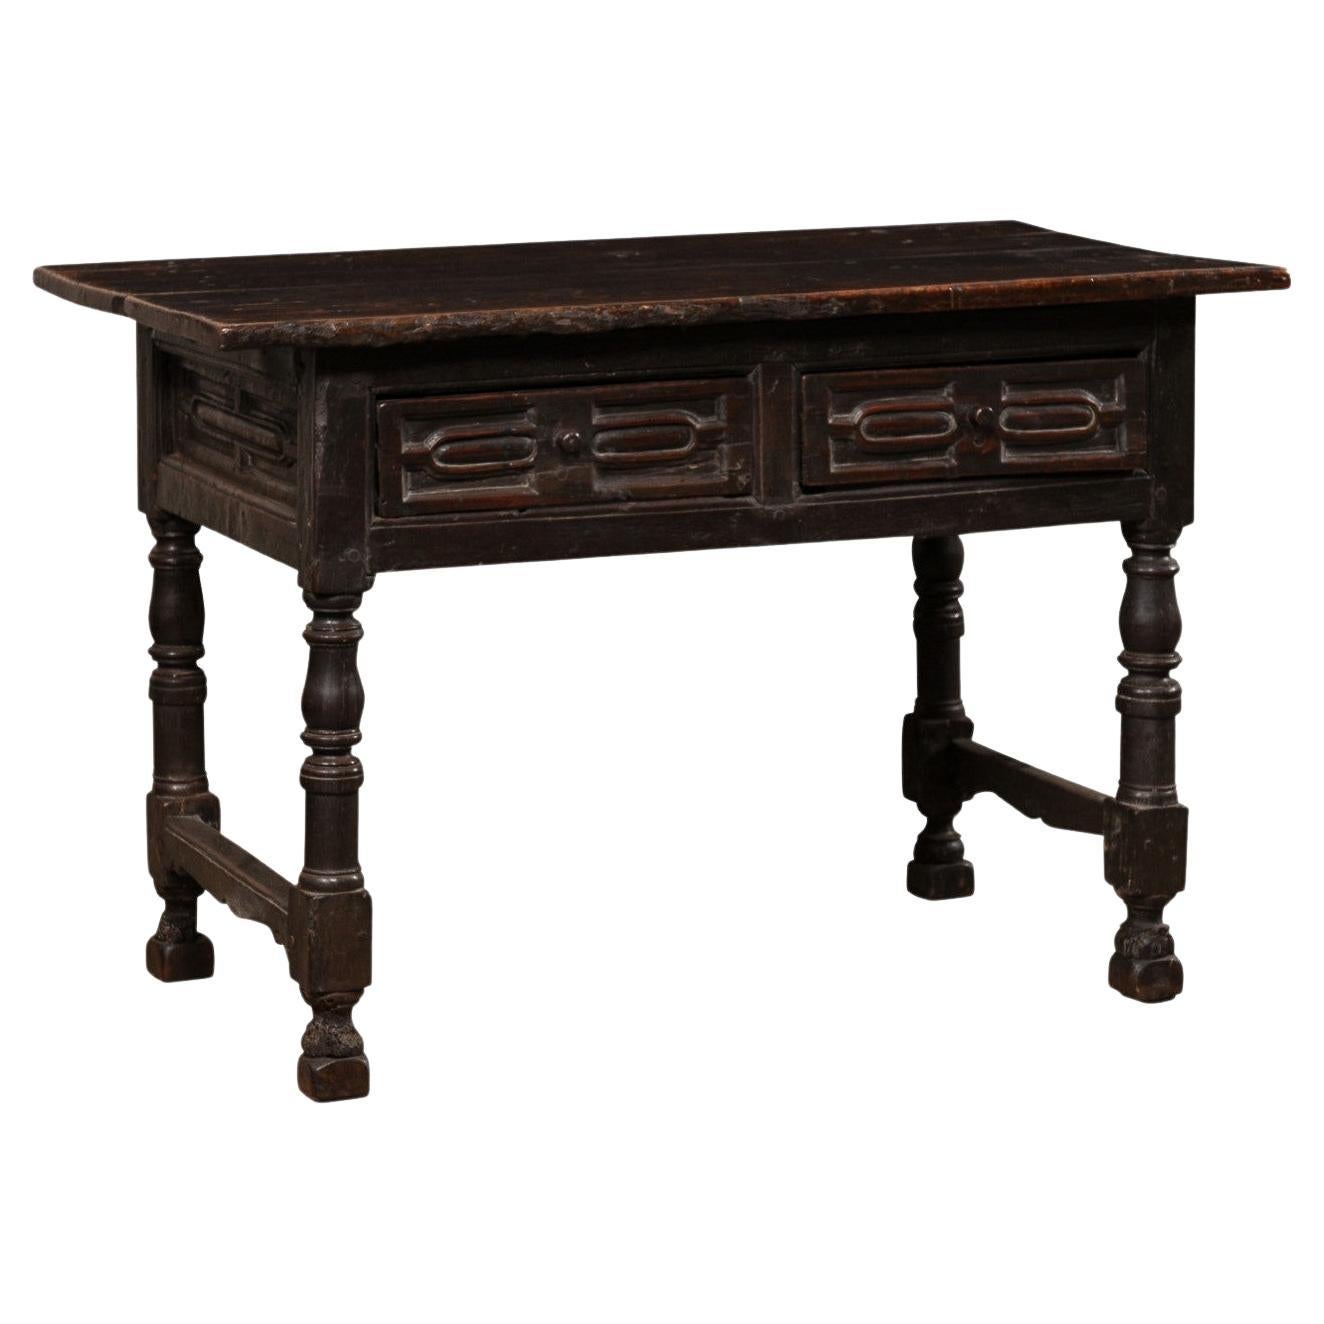 Italian Carved-Walnut Occasional Table W/Drawers, All Sides Carved, Early 18th C For Sale